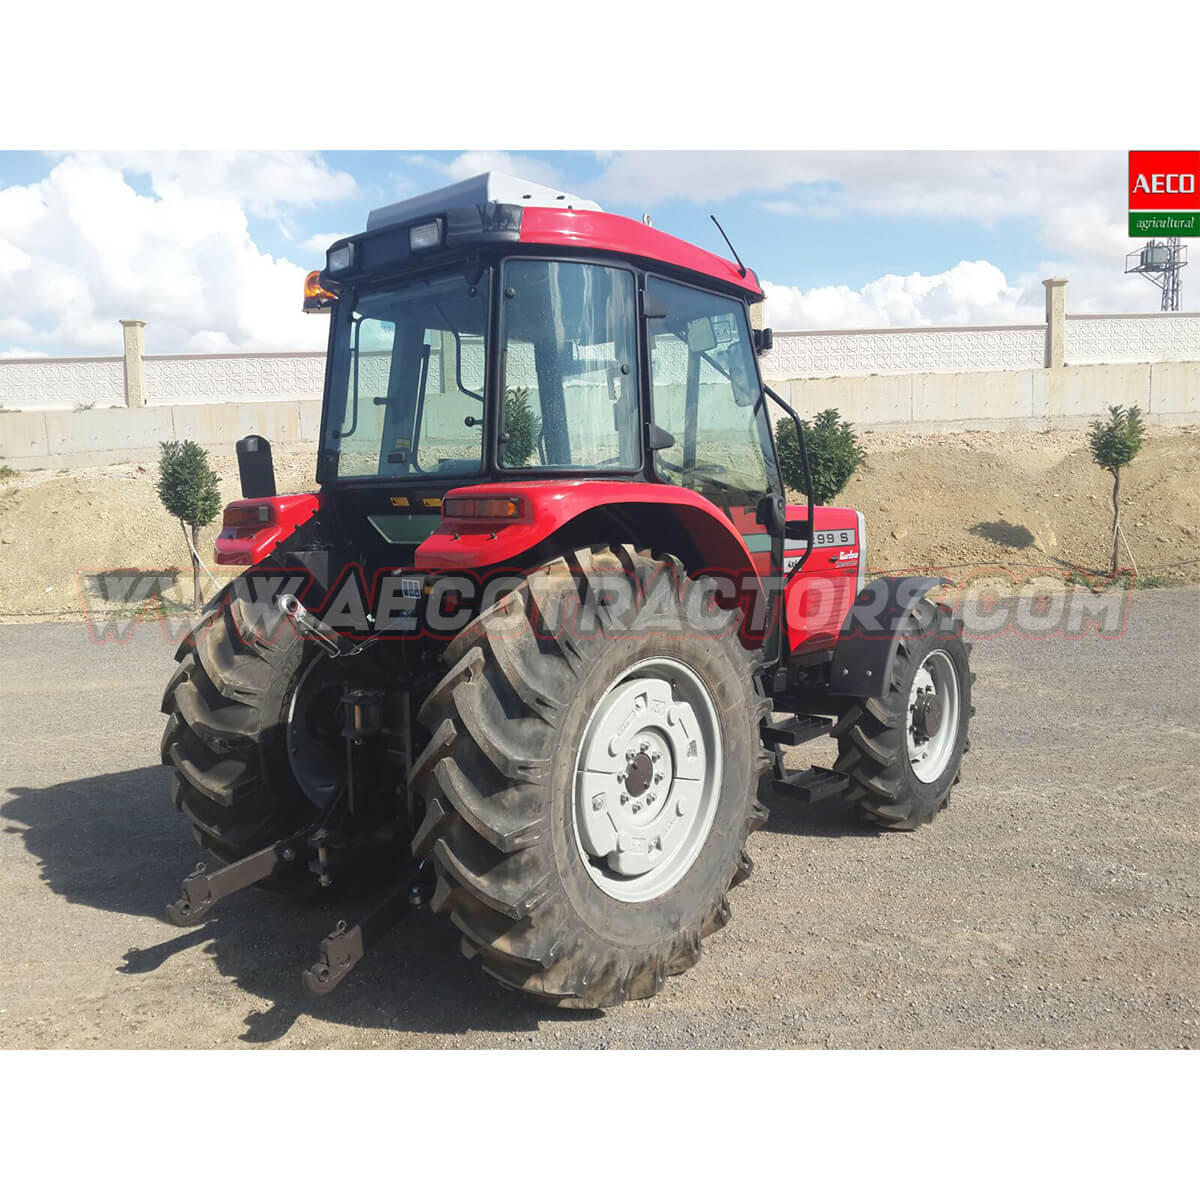 MF 299 TRACTOR FOR SALE